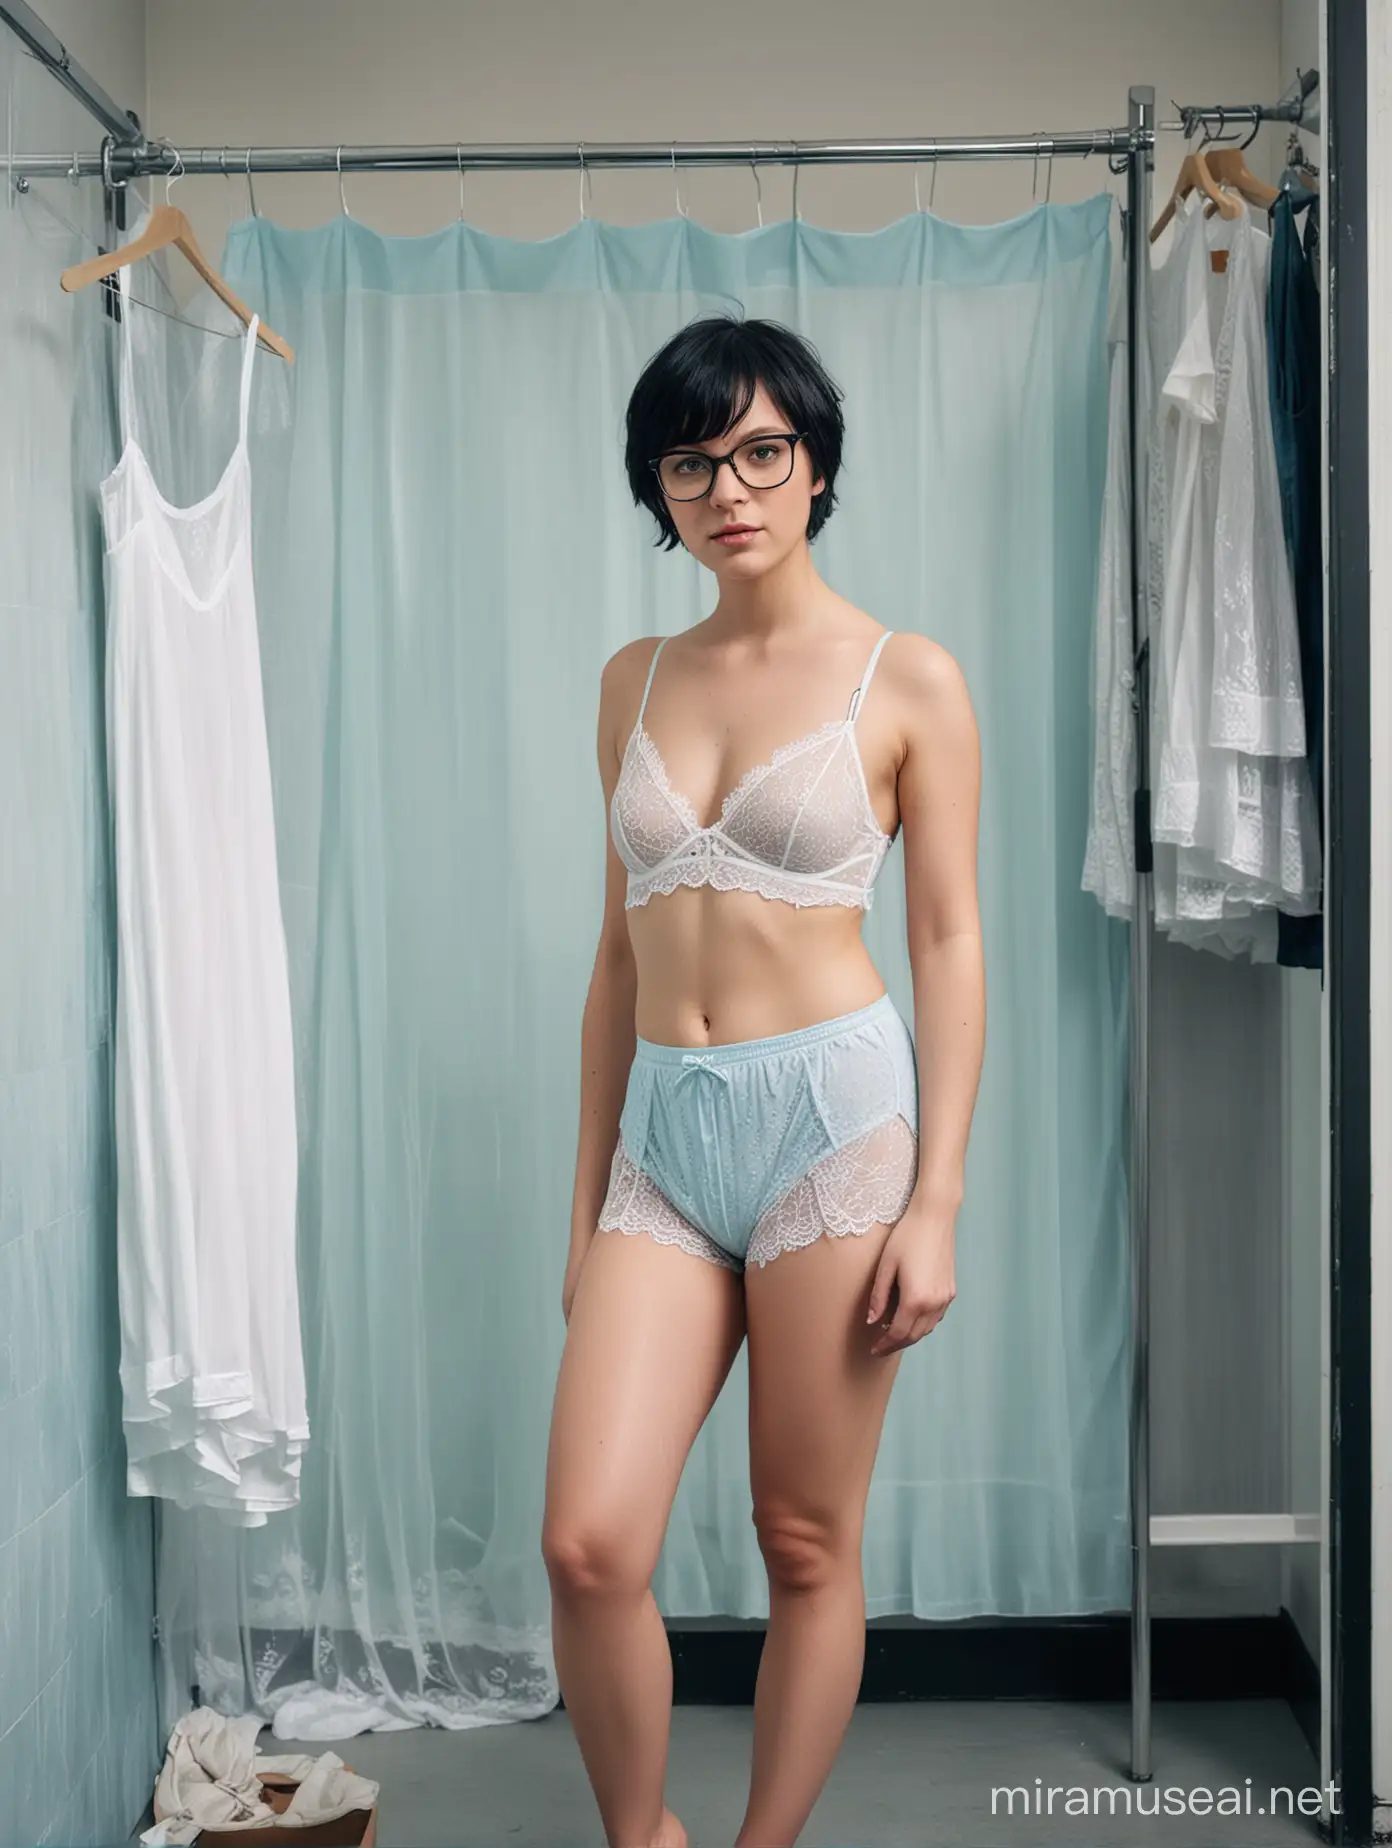 A colour photo of a woman with glasses and   short black hair, wearing a short pale blue slip and wet white lacy panties, standing with legs apart, in a gloomy shop changing room.